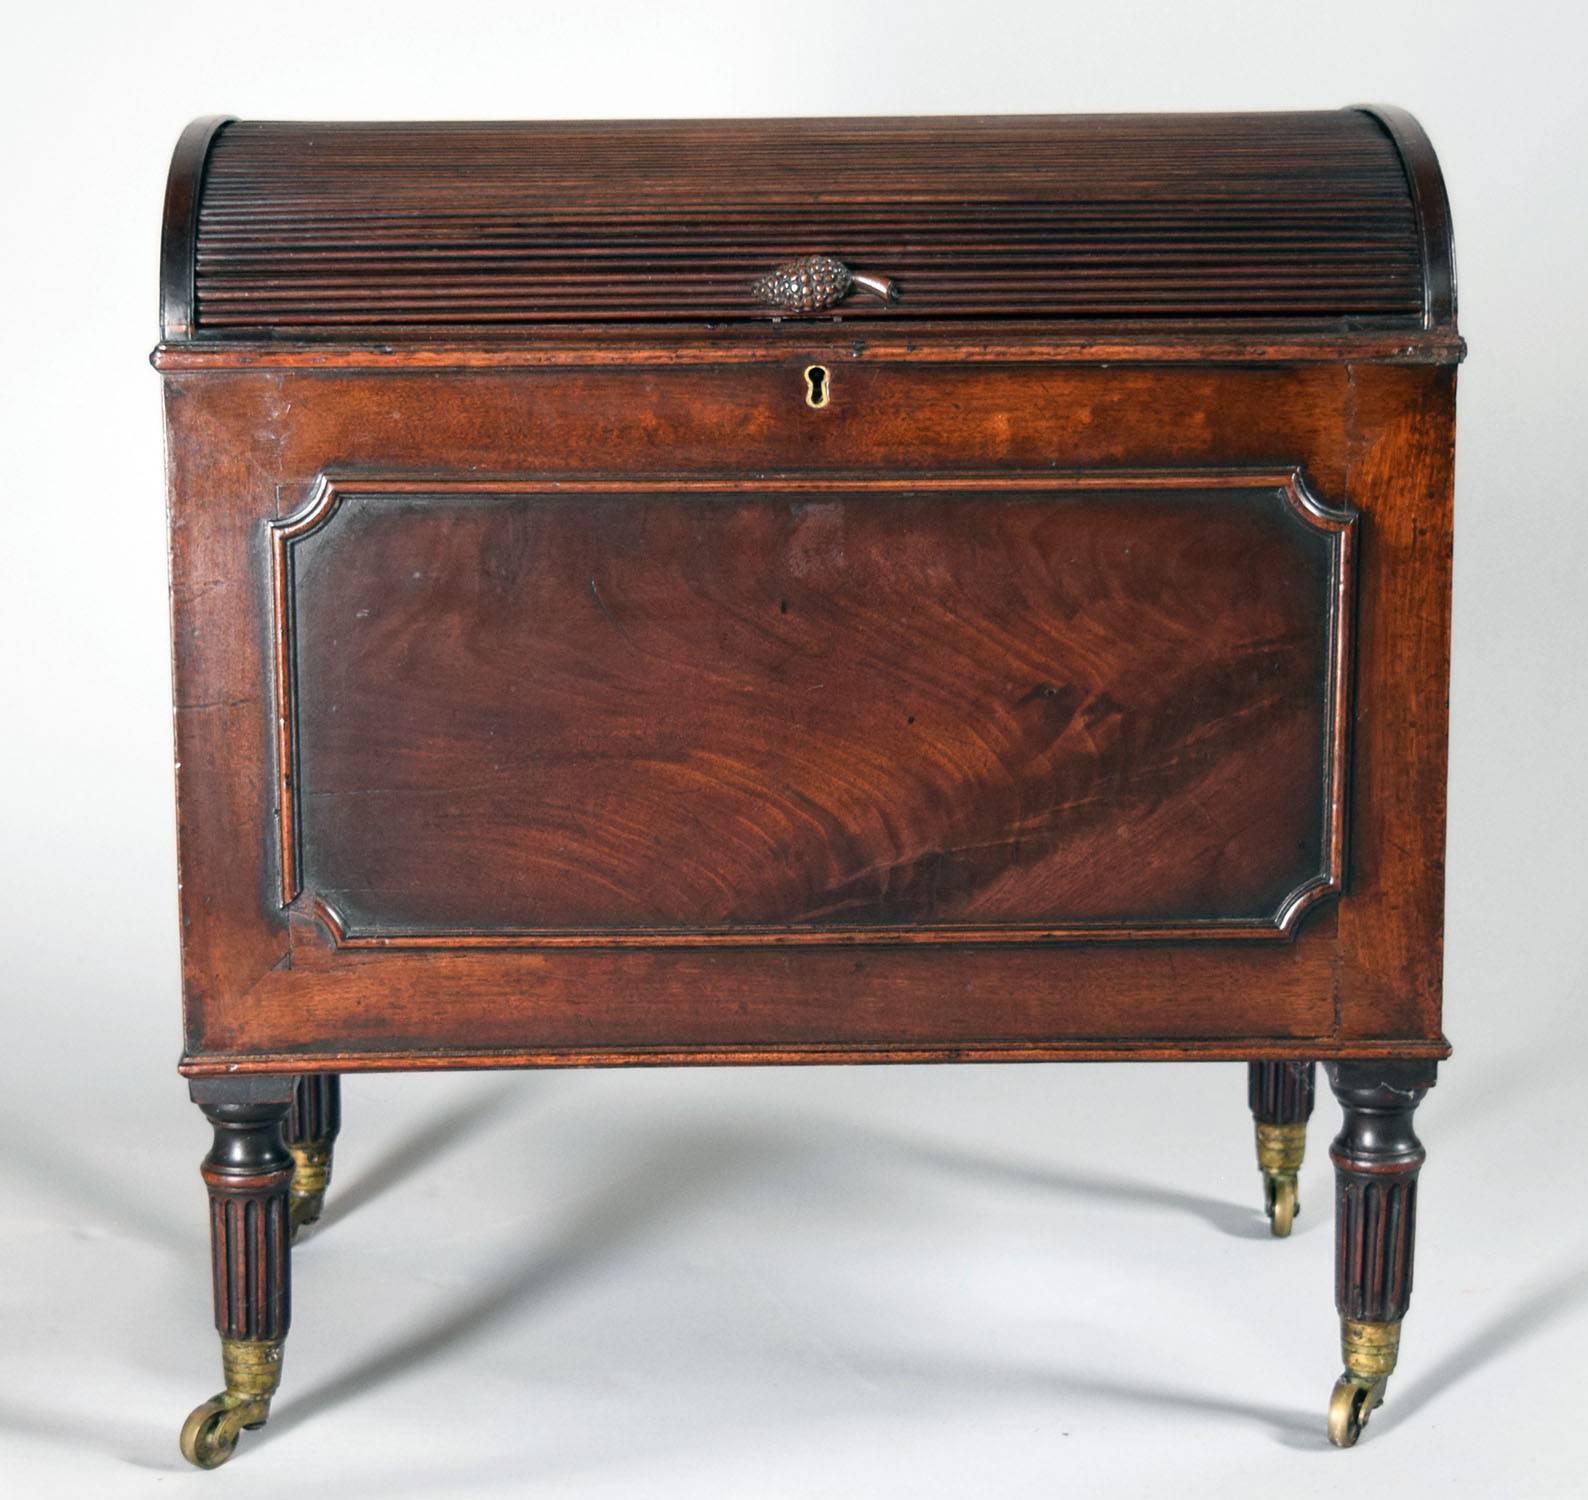 Mahogany domed top form with turned reeded legs on casters and handsomely adorned with dramatic mahogany inset veneer, circa 1790.

Provenance: Roundwood Manor, Hunting Valley, Ohio.